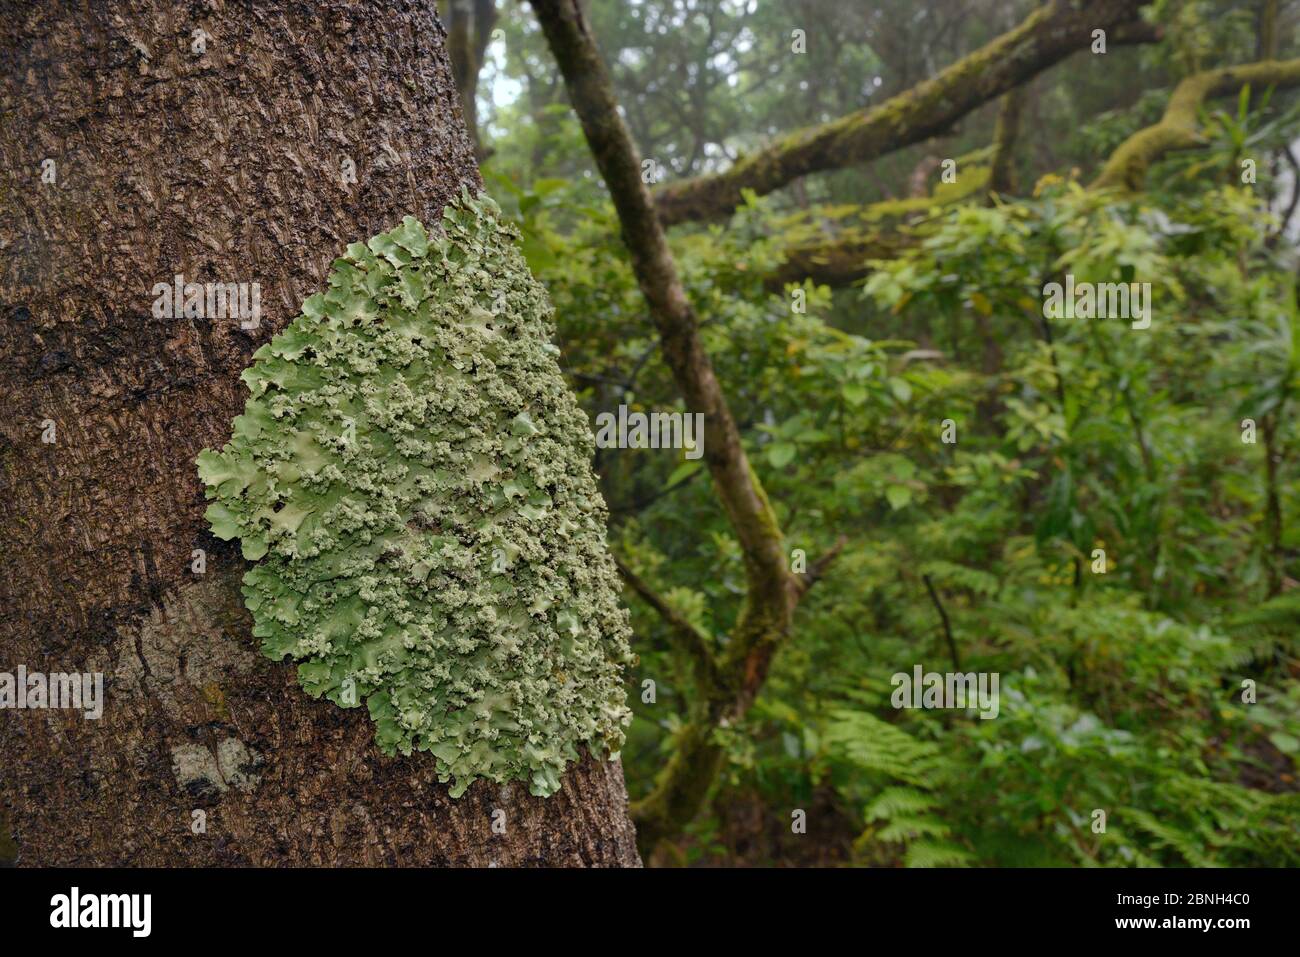 Common greenshield lichen (Flavoparmelia caperata) patch growing on a tree trunk in montane Laurel forest, Anaga Mountains, Tenerife, May. Stock Photo